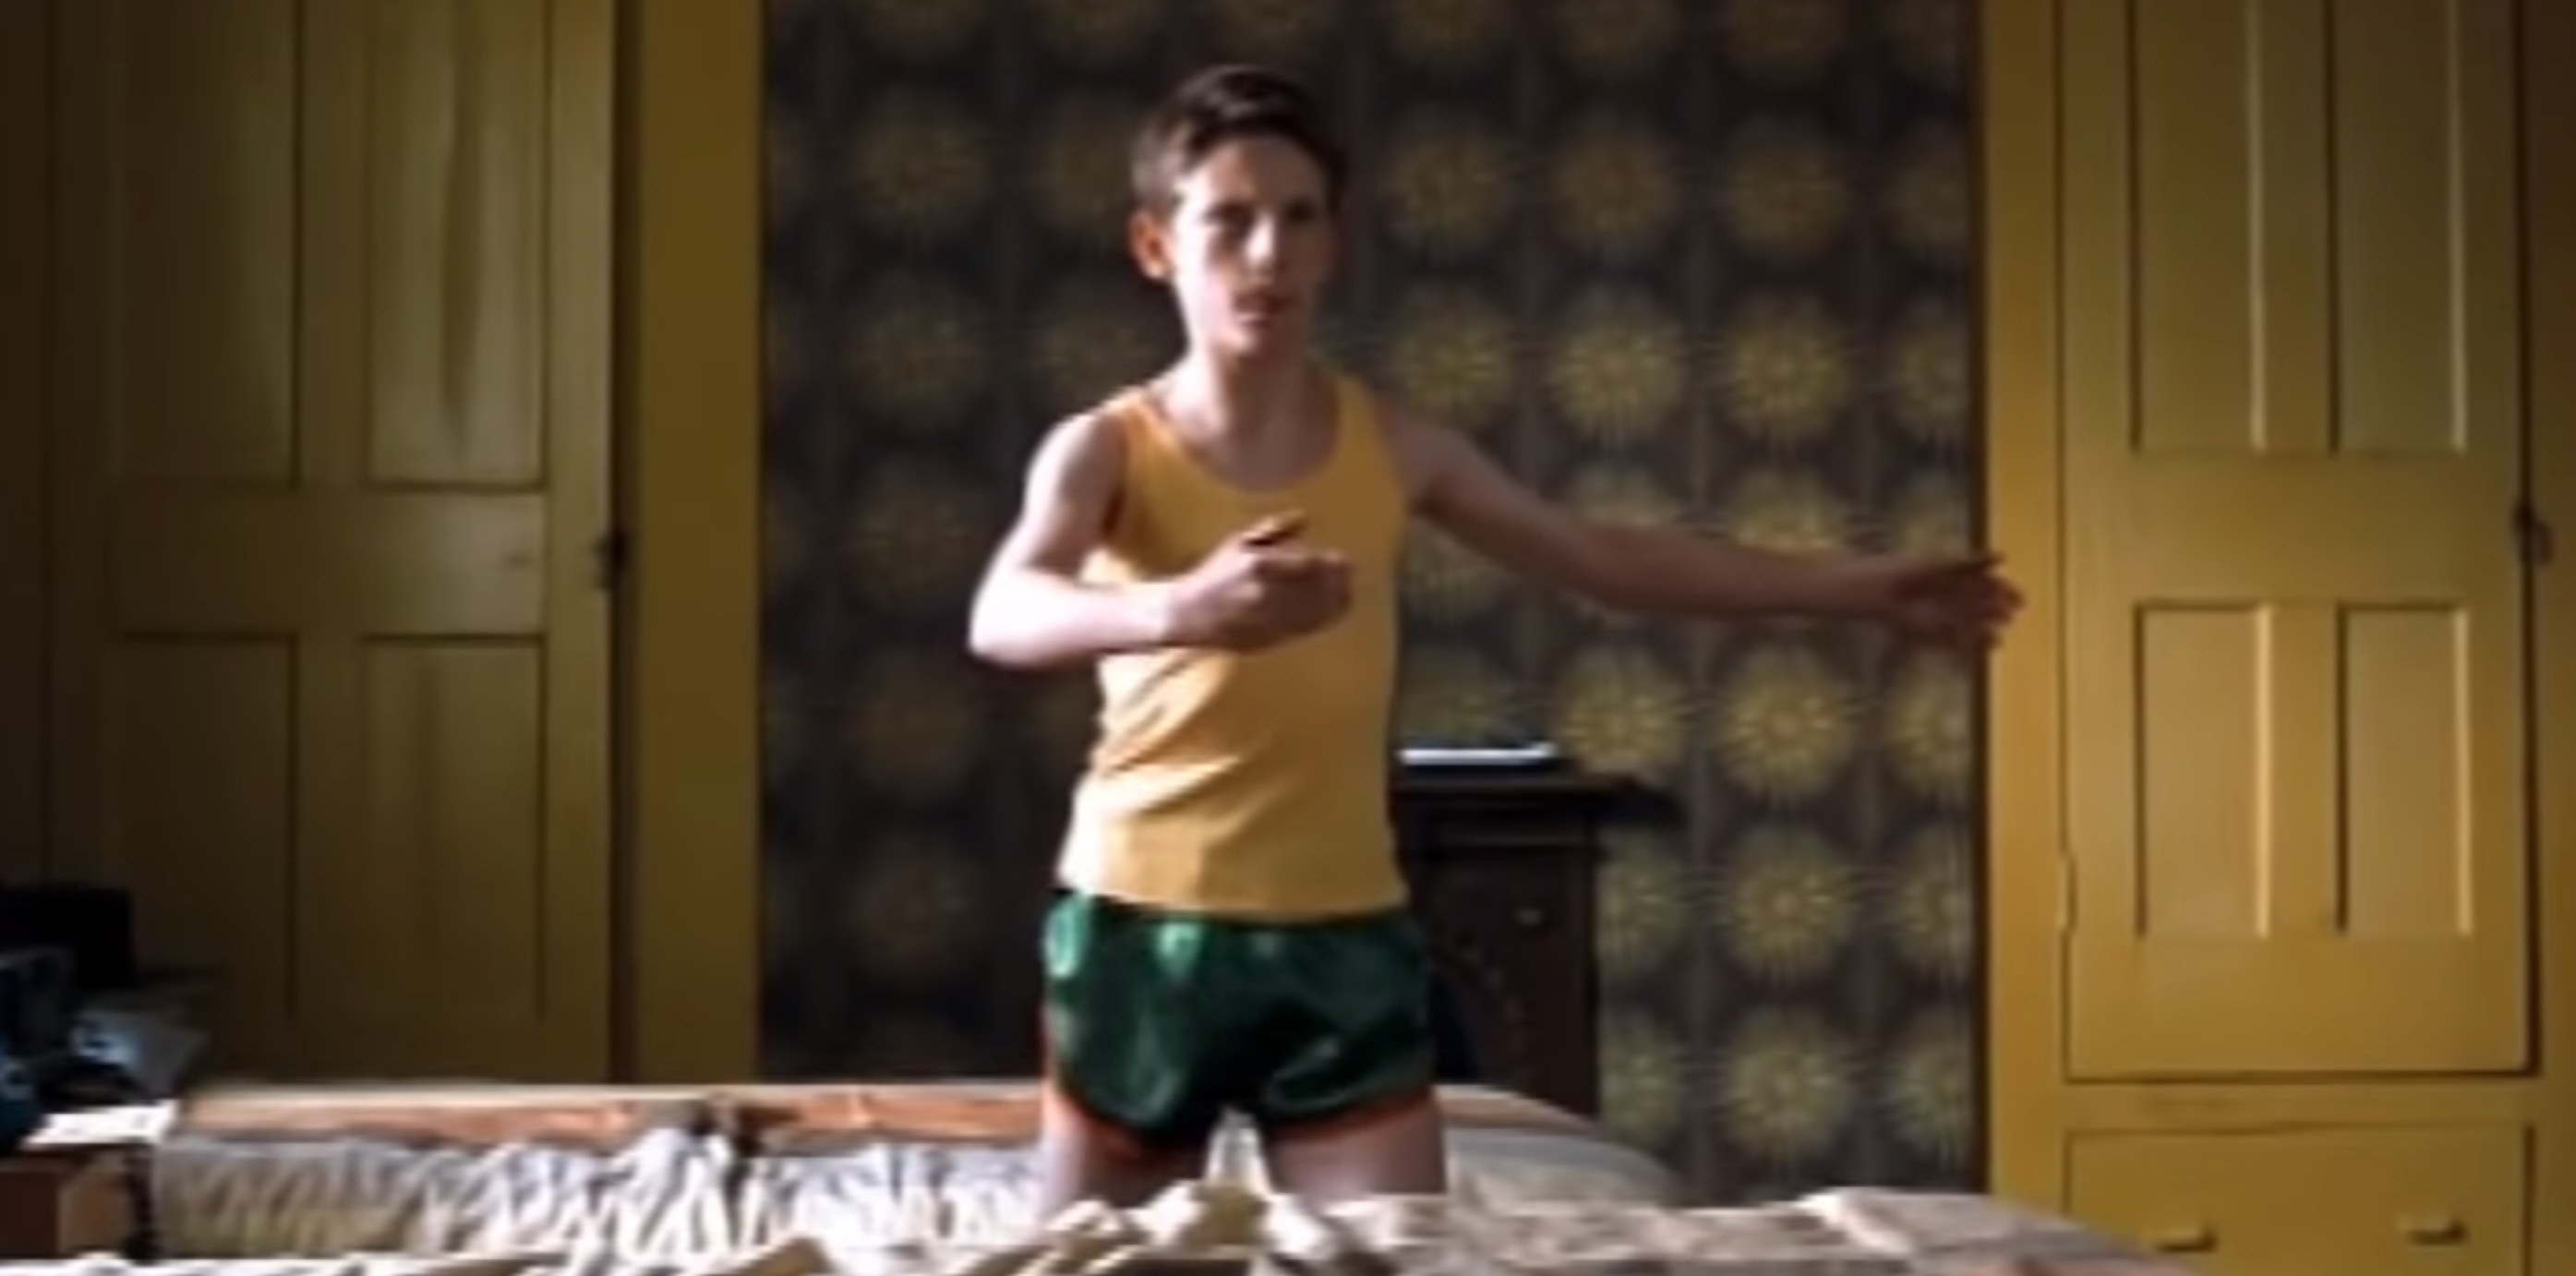 A young boy wearing gym clothes doing a dance move